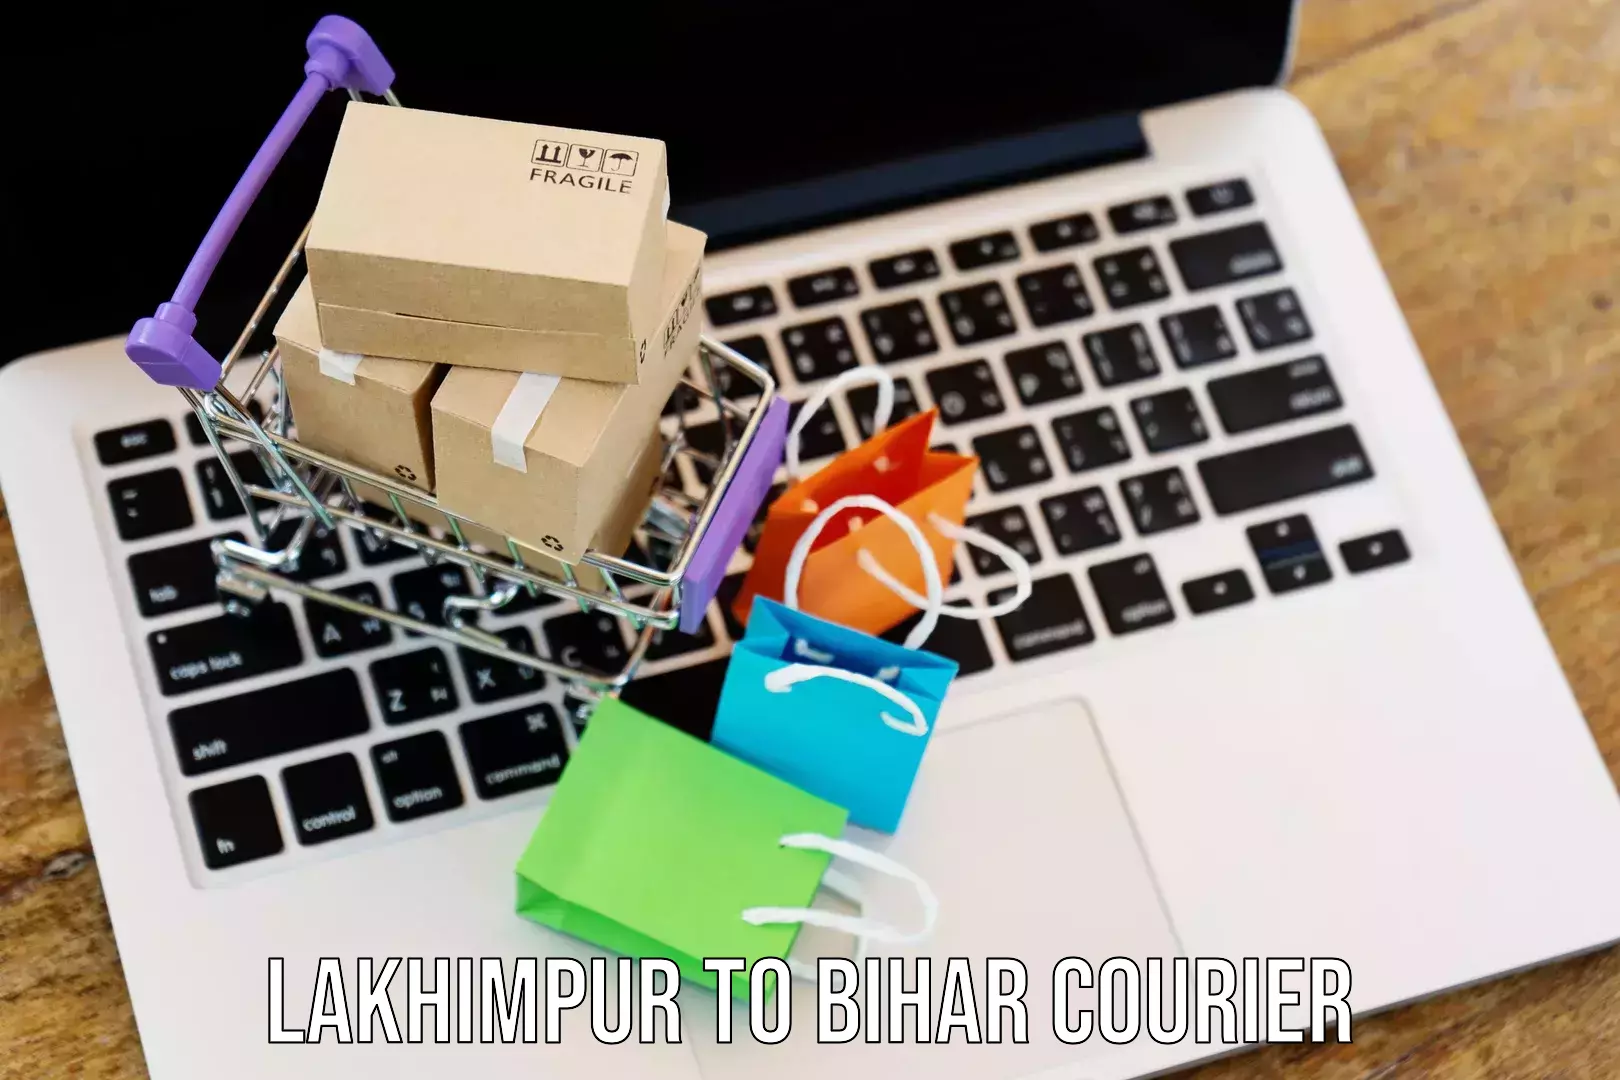 User-friendly courier app Lakhimpur to Barauni